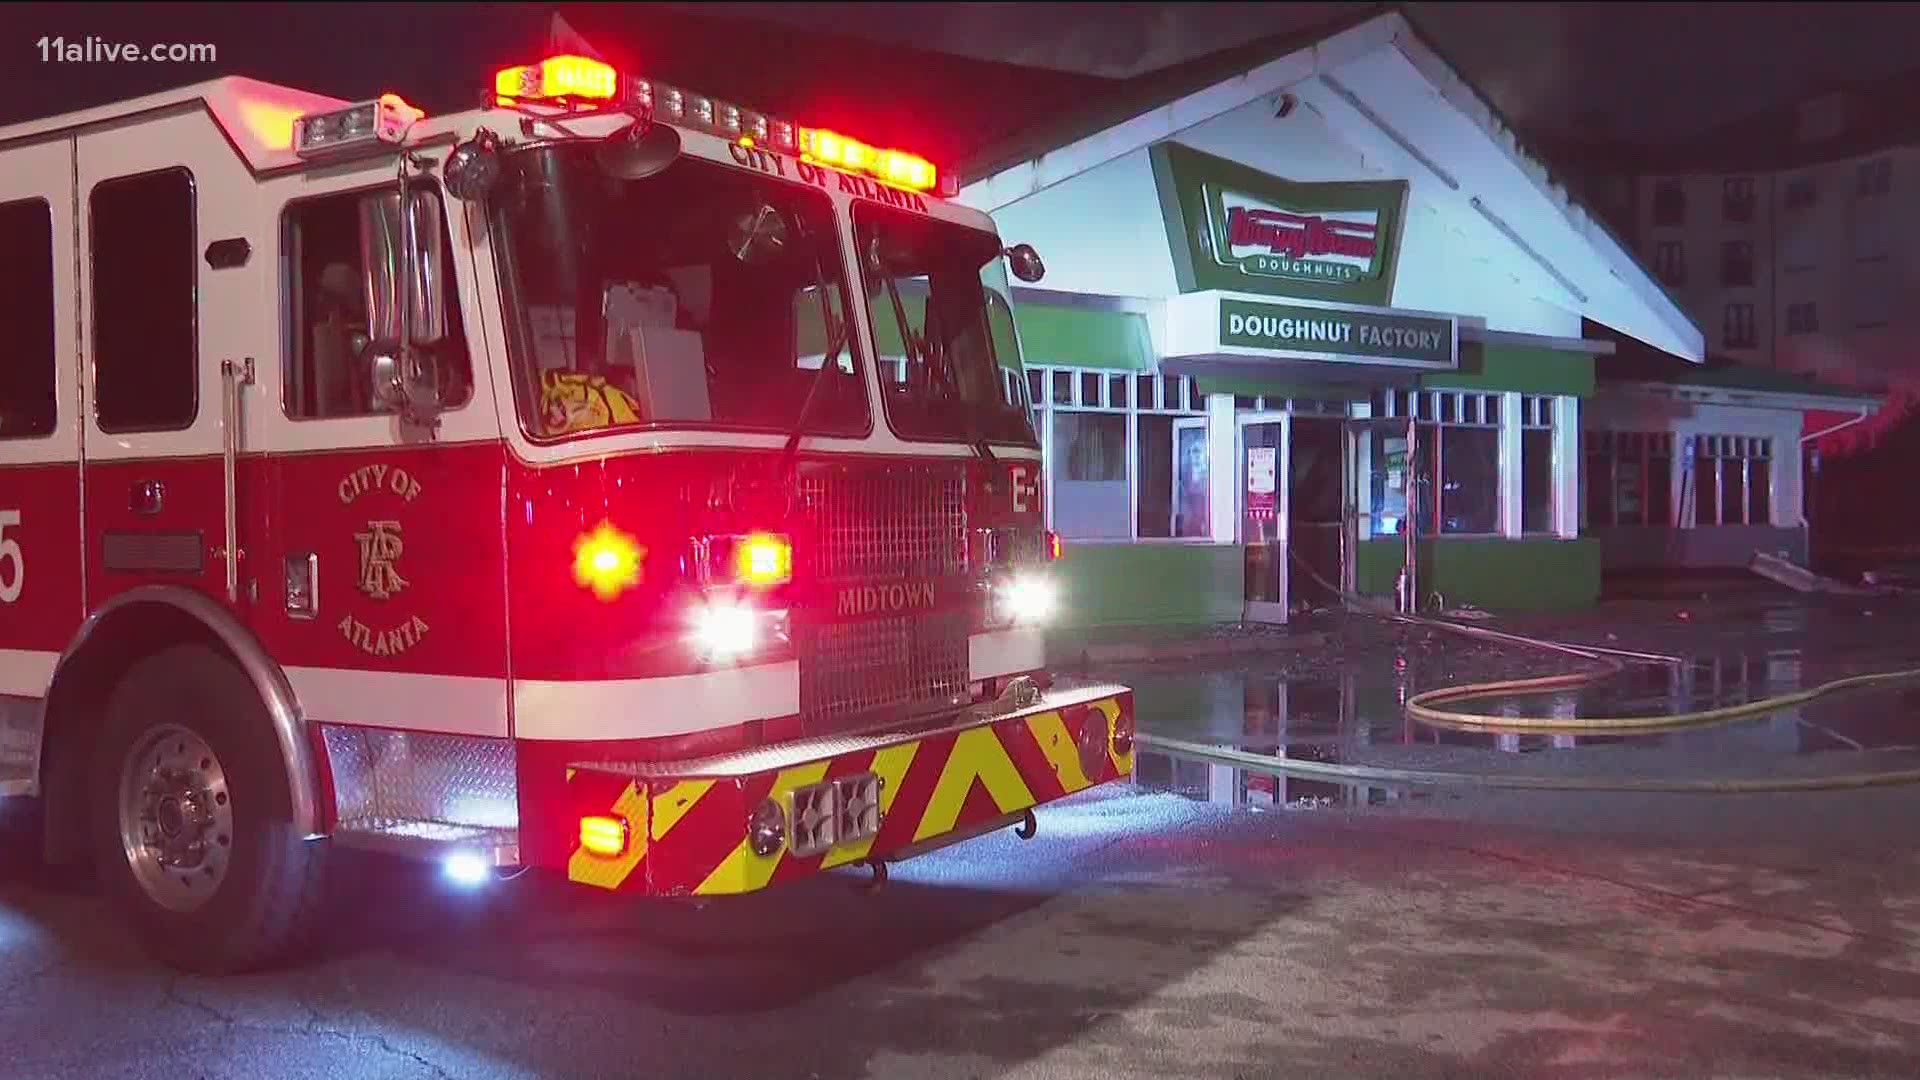 Two workers were inside and had to escape the fire.